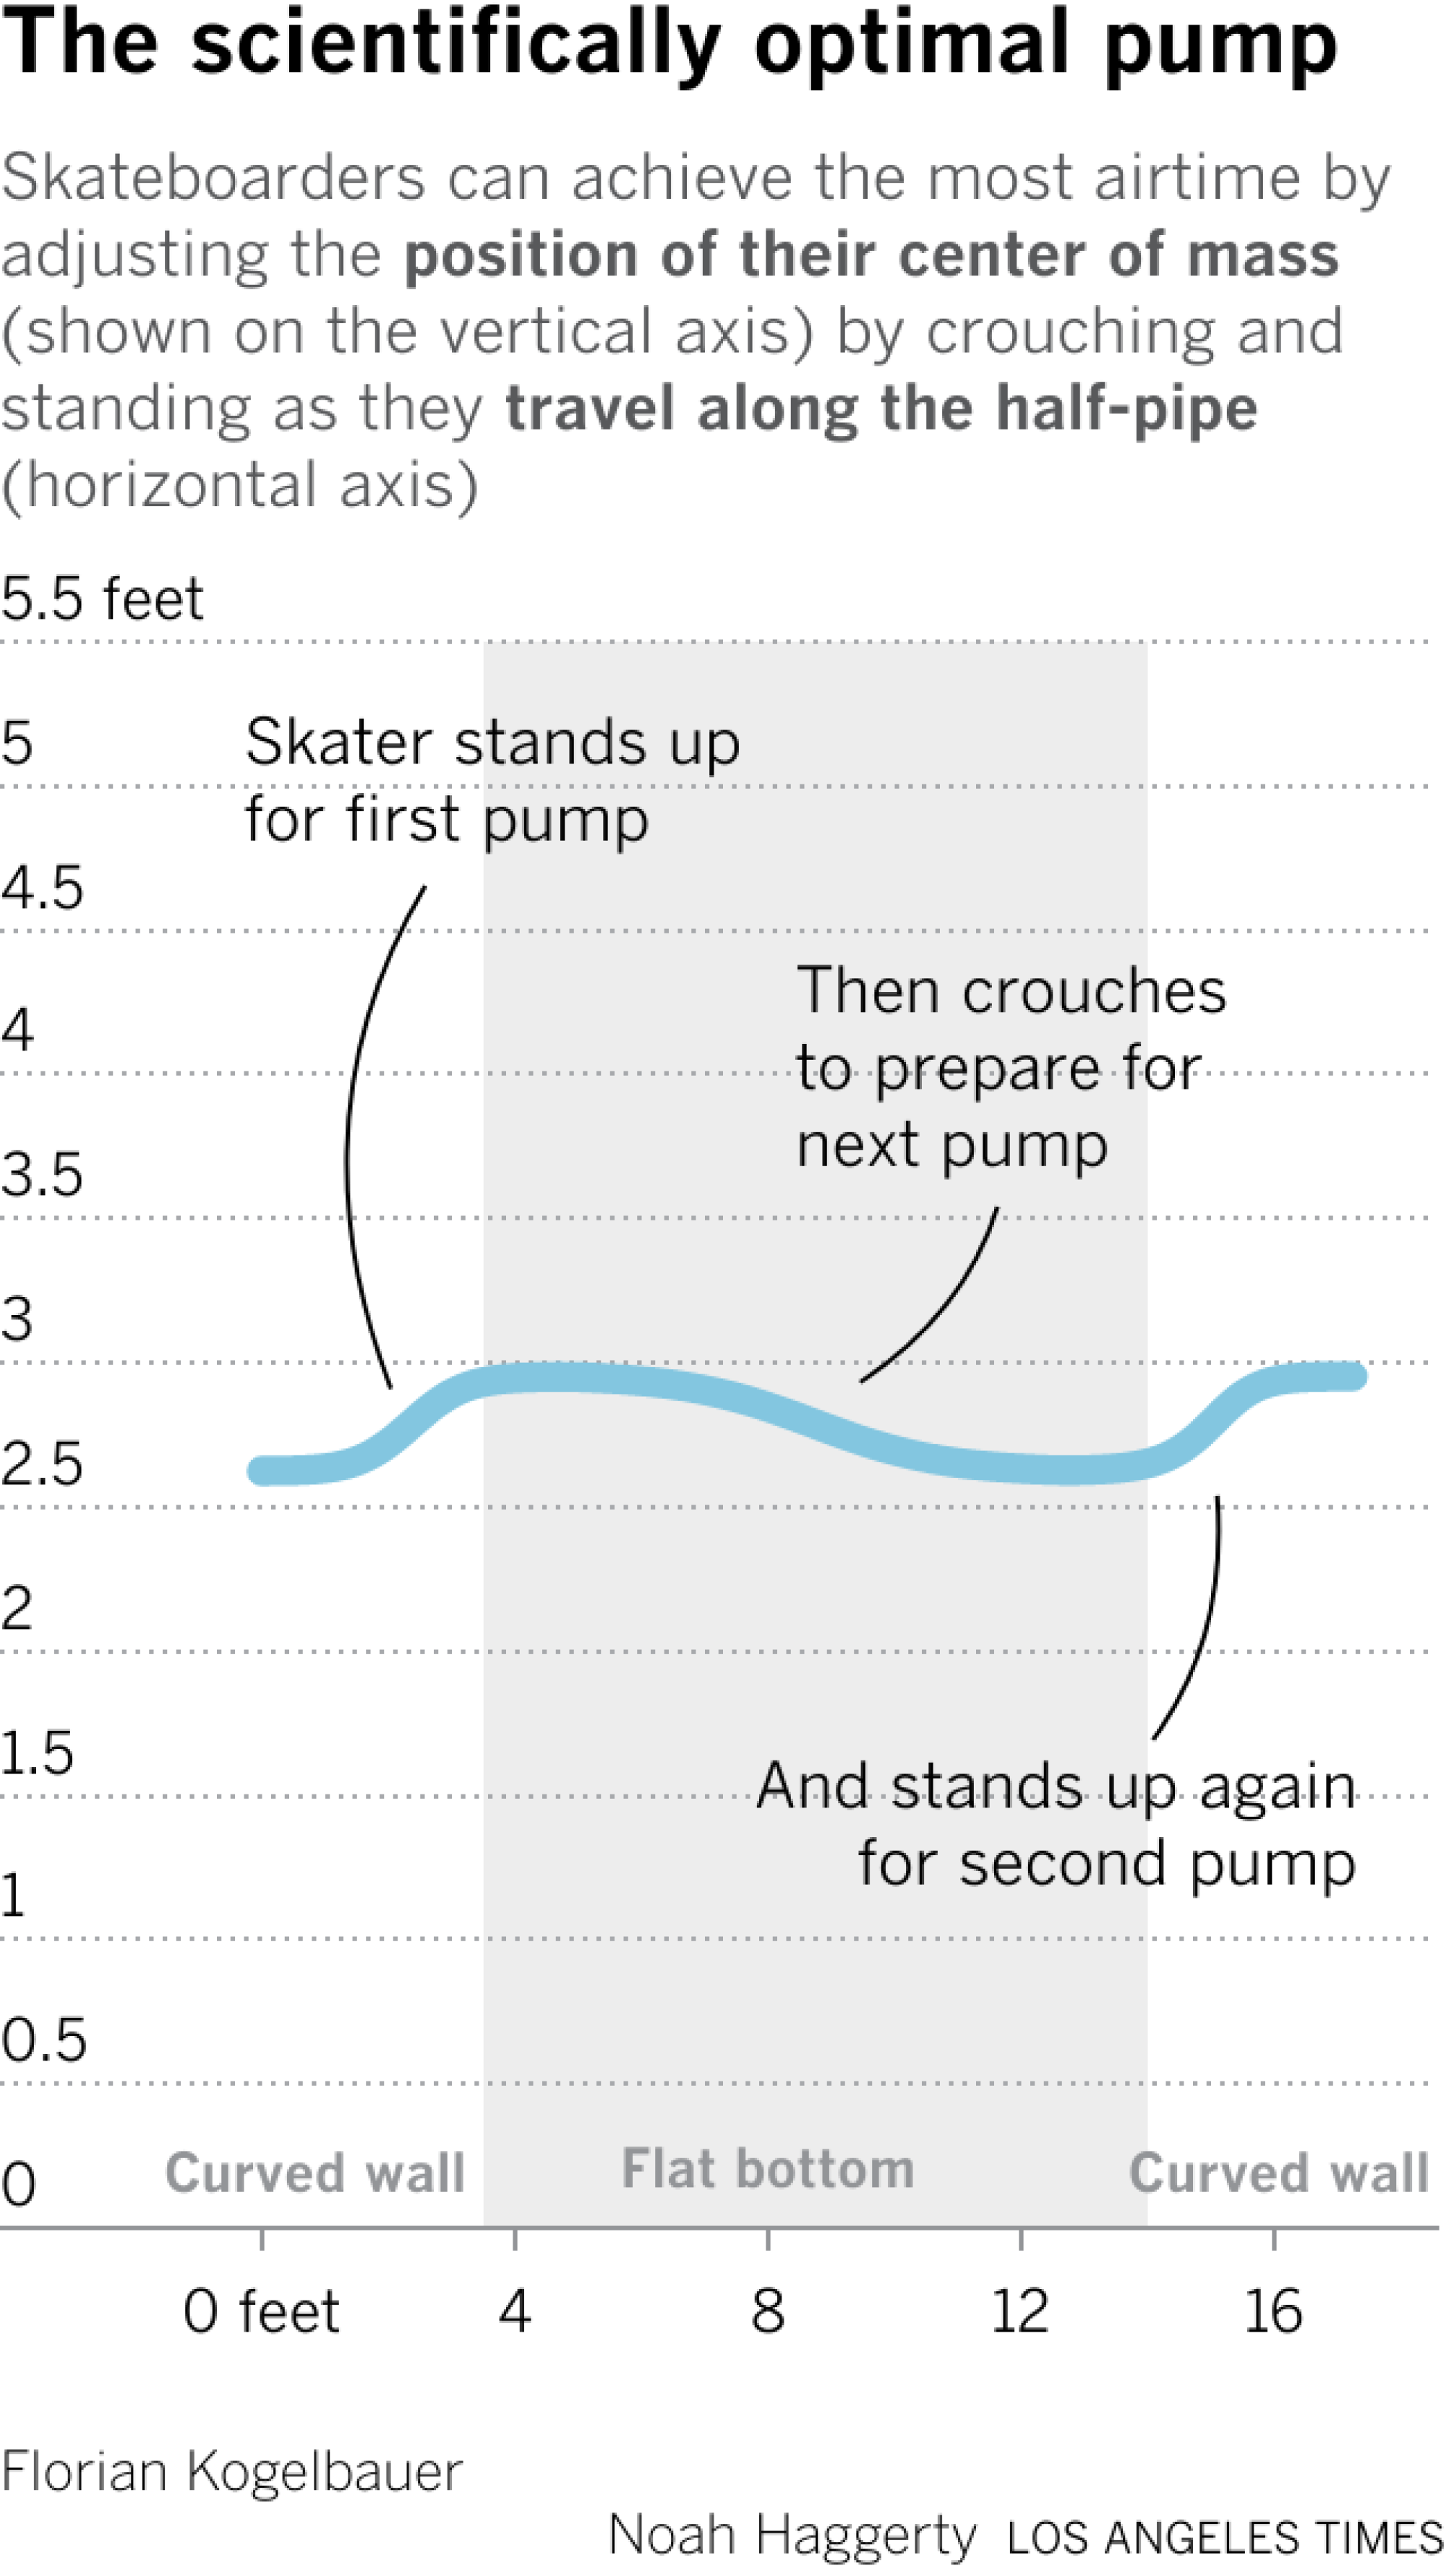 First, skaters stand from a crouched position, pumping on the curved wall as they enter the bowl. Then, along the flat middle, they slowly crouch in preparation. Finally, they stand again to pump while they travel up the curved wall on the opposite side.